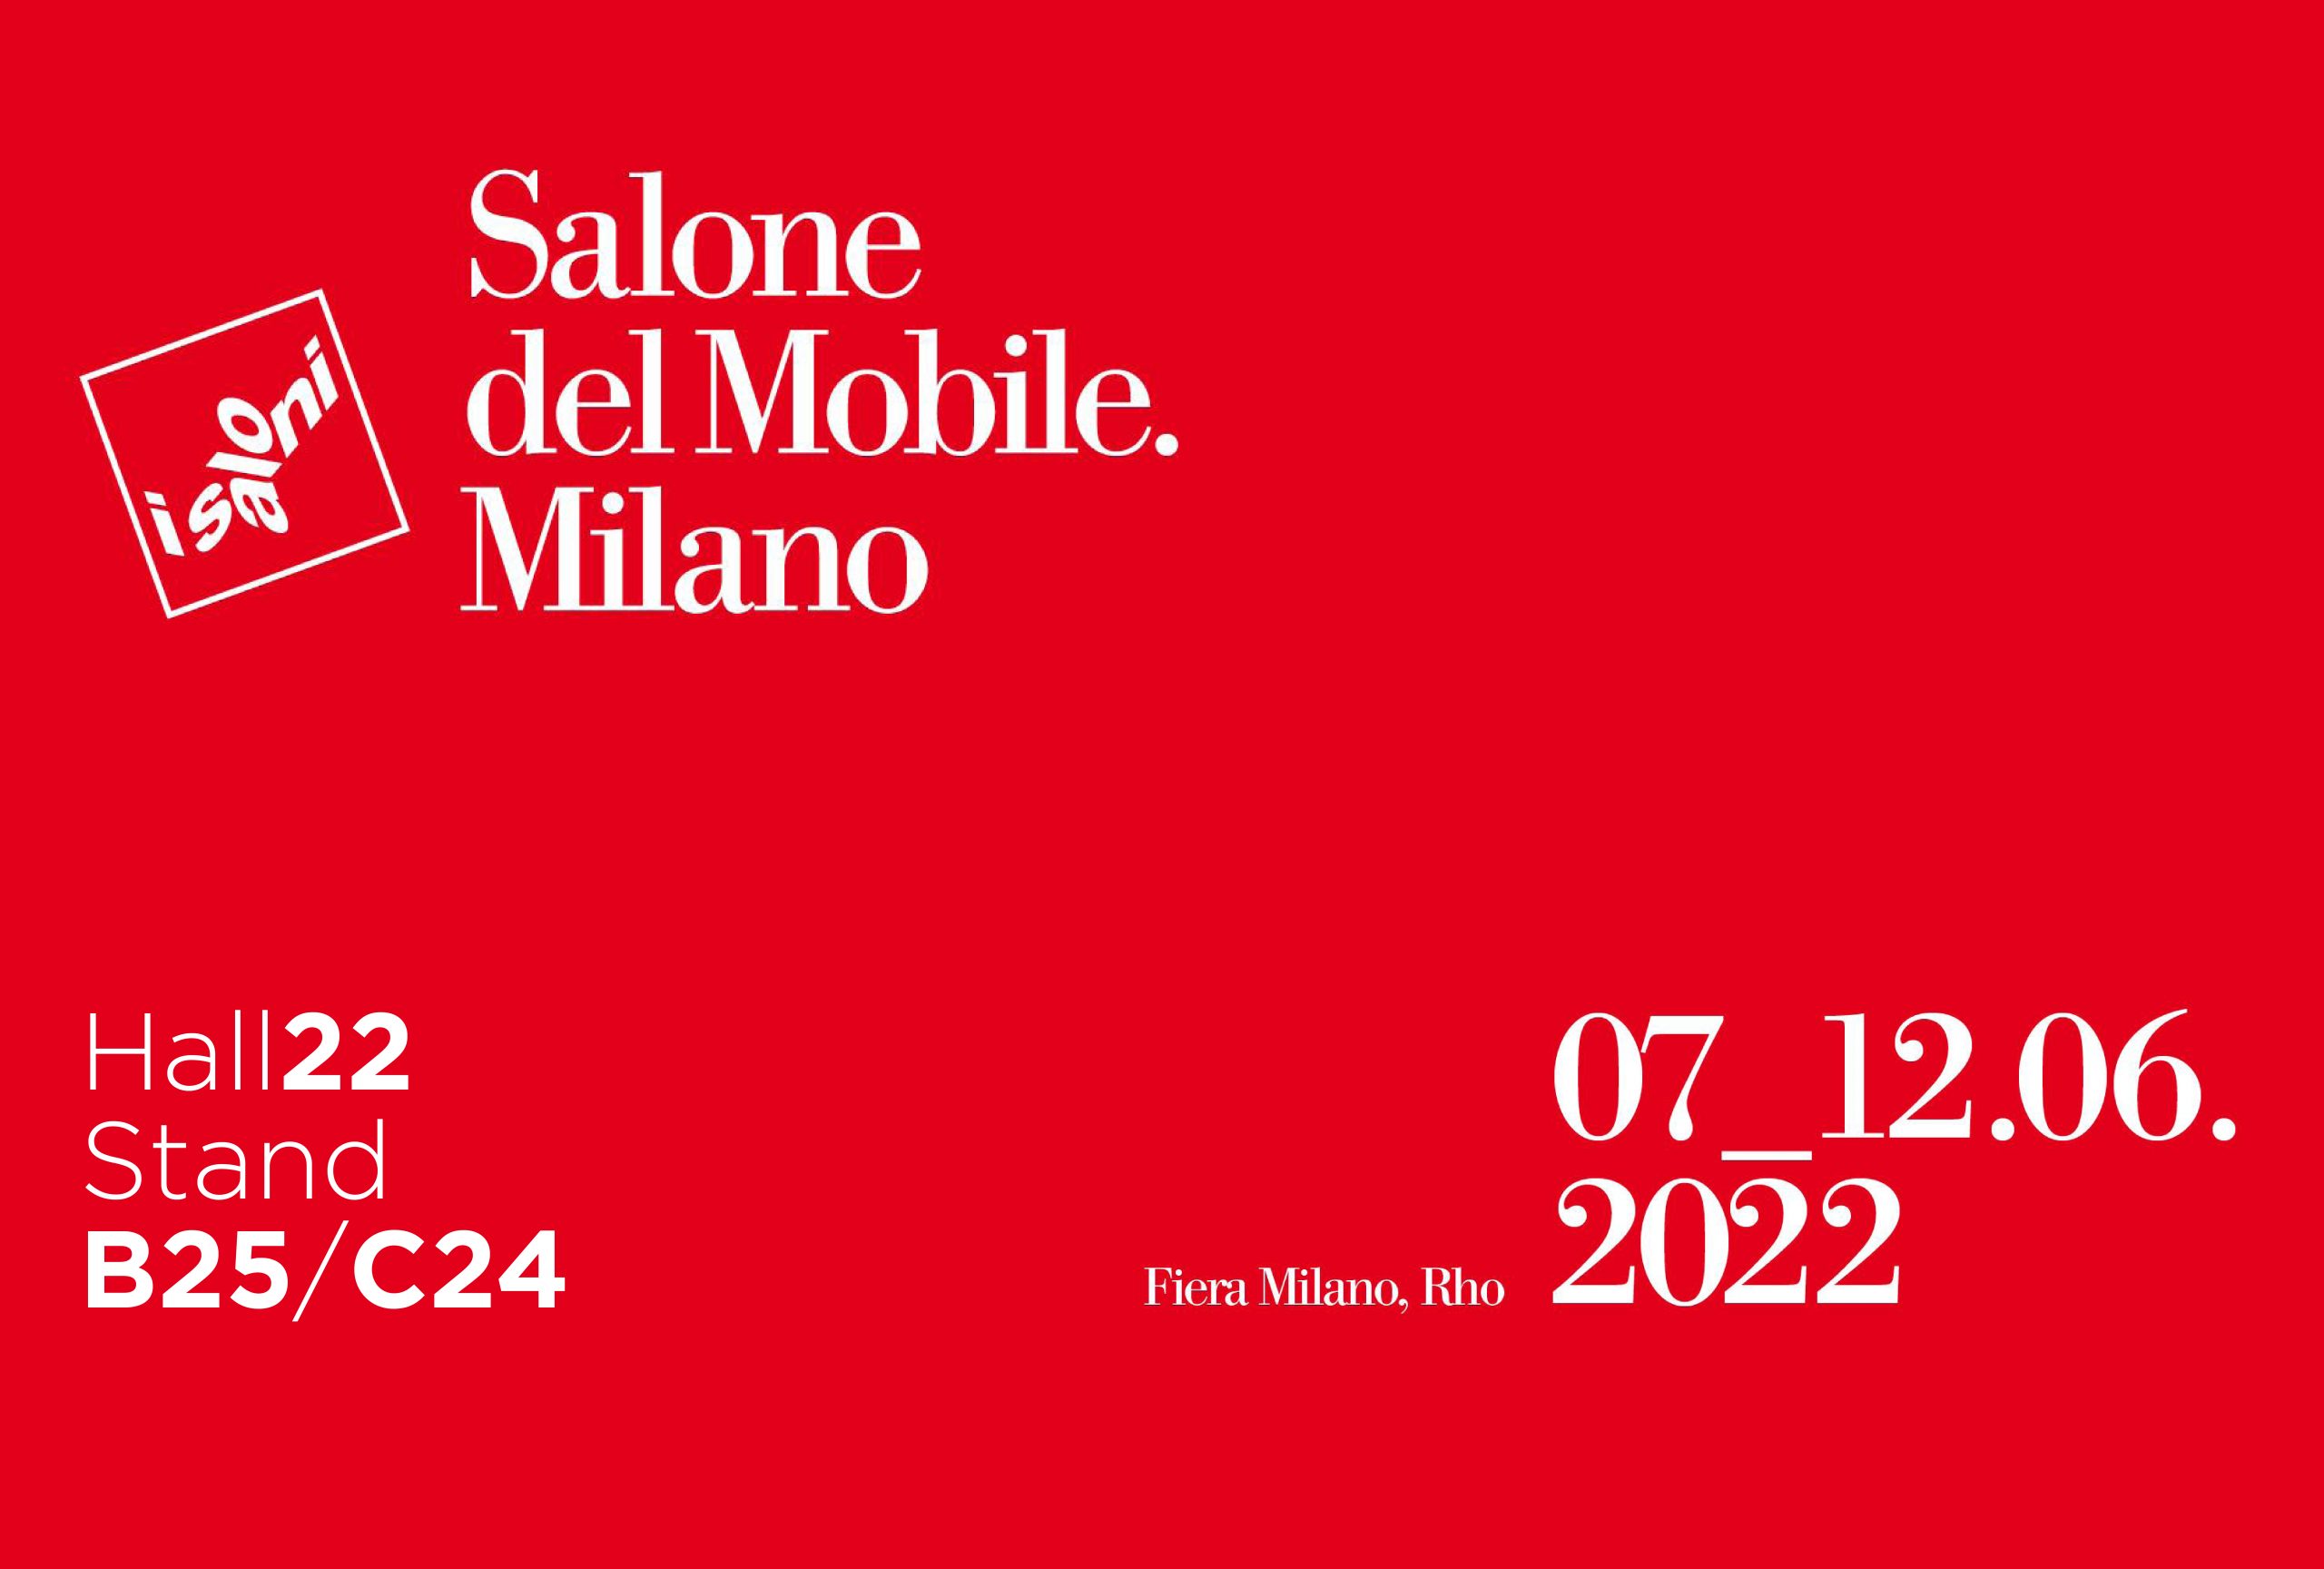 https://www.arbiarredobagno.it/wp-content/uploads/2022/03/Salone-homepage-scaled.jpg